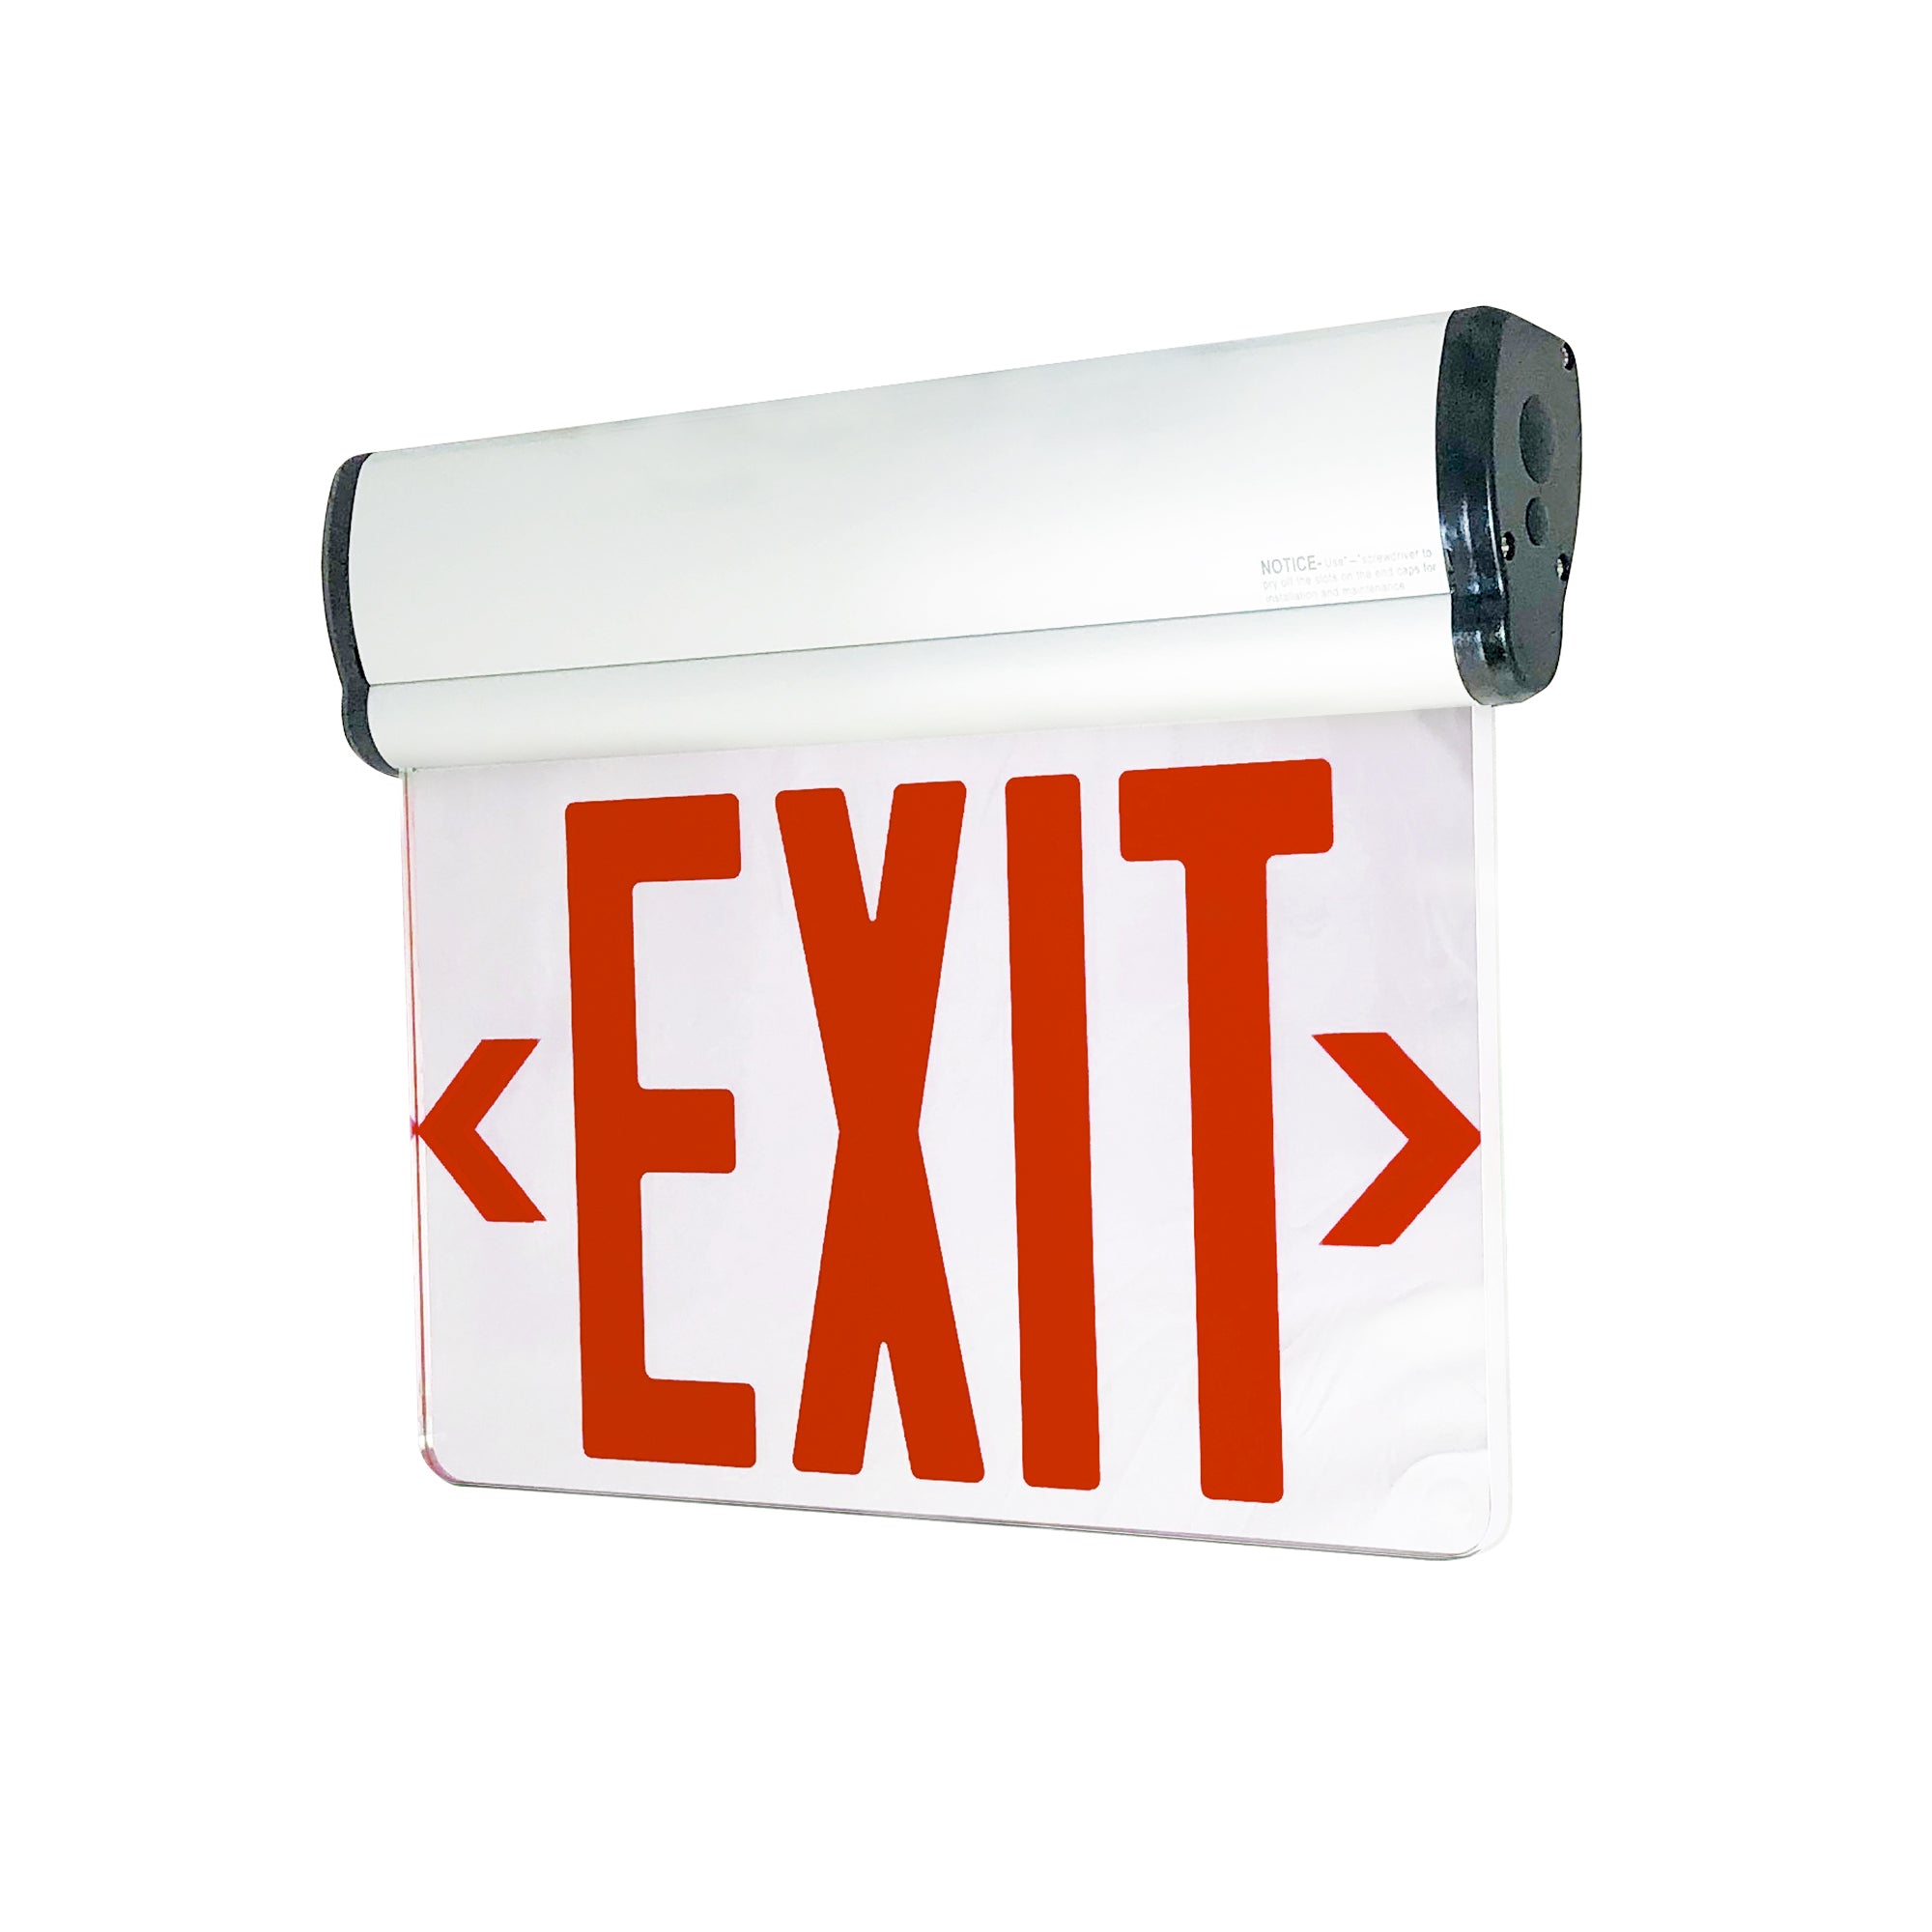 Nora Lighting NX-811-LEDR2MW - Exit / Emergency - Surface Adjustable LED Edge-Lit Exit Sign, 2 Circuit, 6 Inch Red Letters, Double Face / Mirrored Acrylic, White Housing